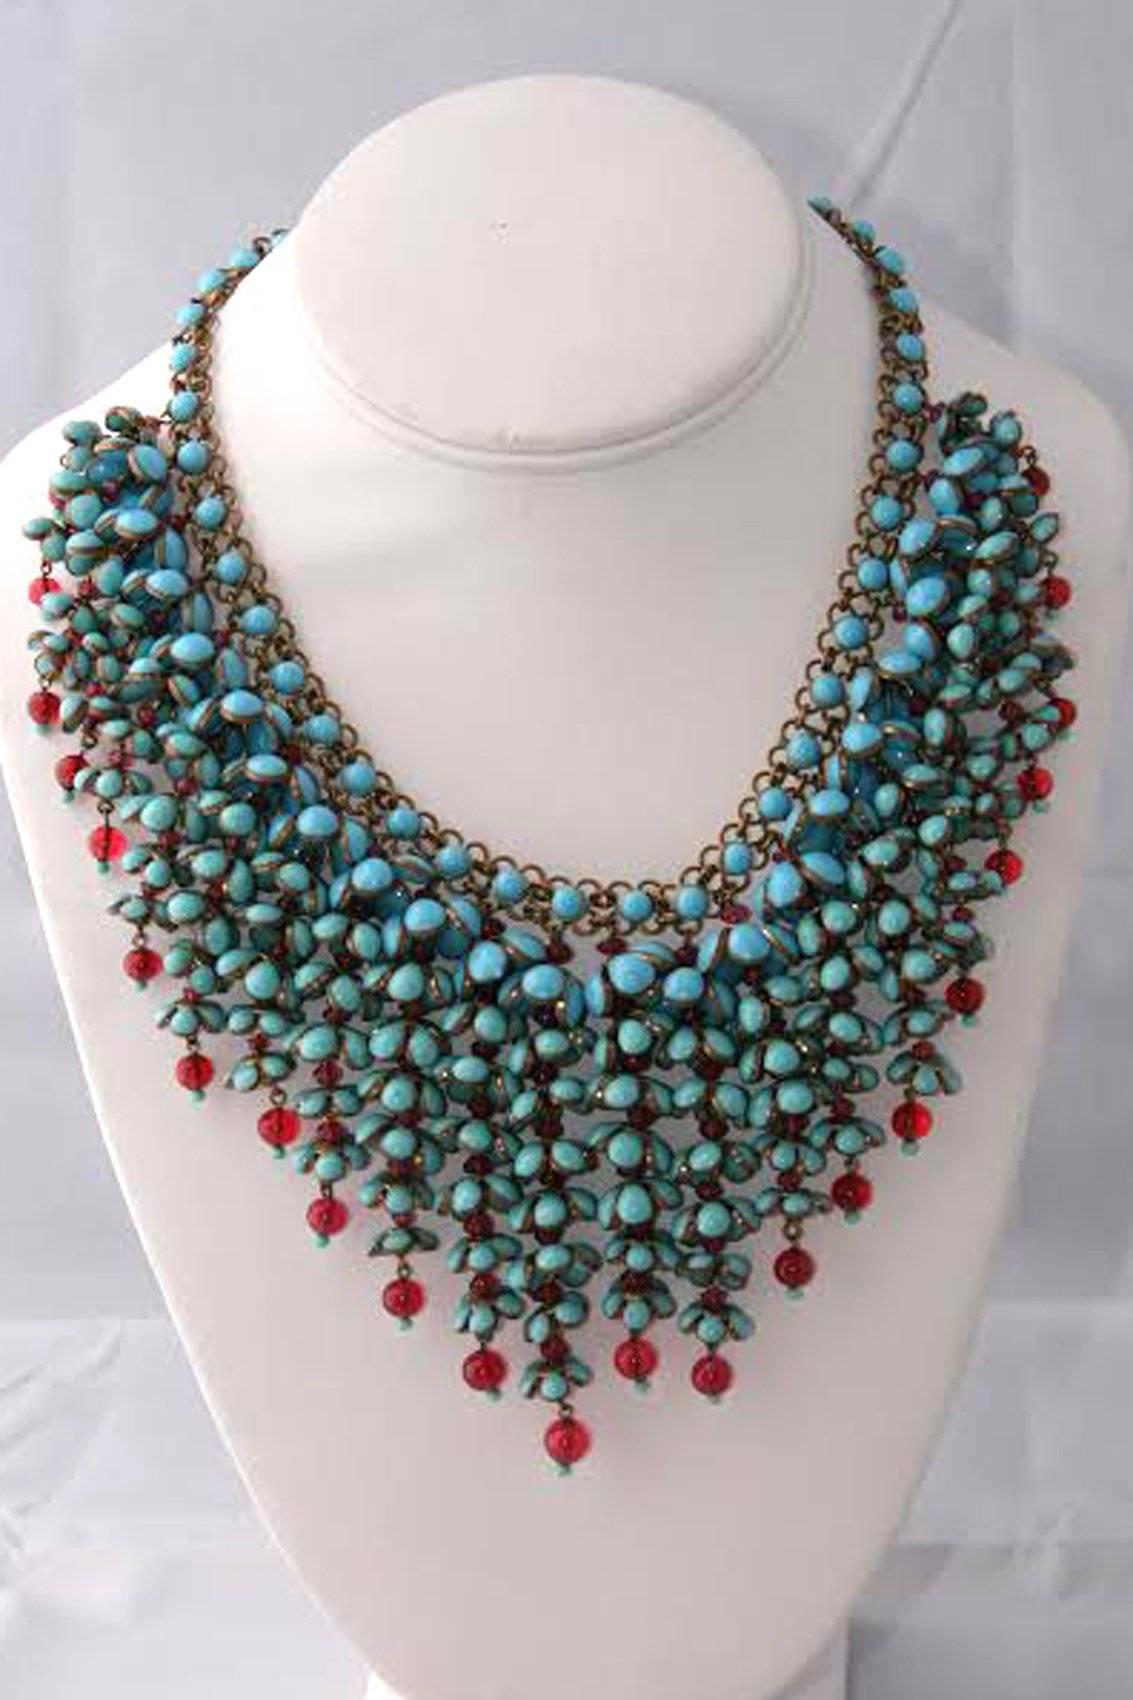 This special RARE and magnificent early statement necklace by Coco Chanel is simply put, among the rarest and most magnificent pieces of jewelry to ever cross this lifelong dealer's path. Constructed of inverted descending pendant flower clusters